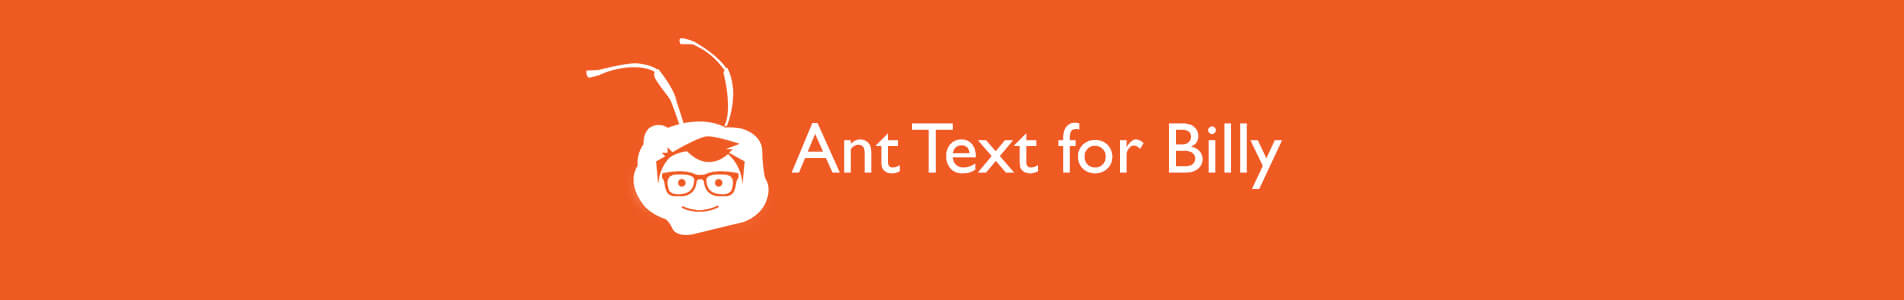 header ant text for billy